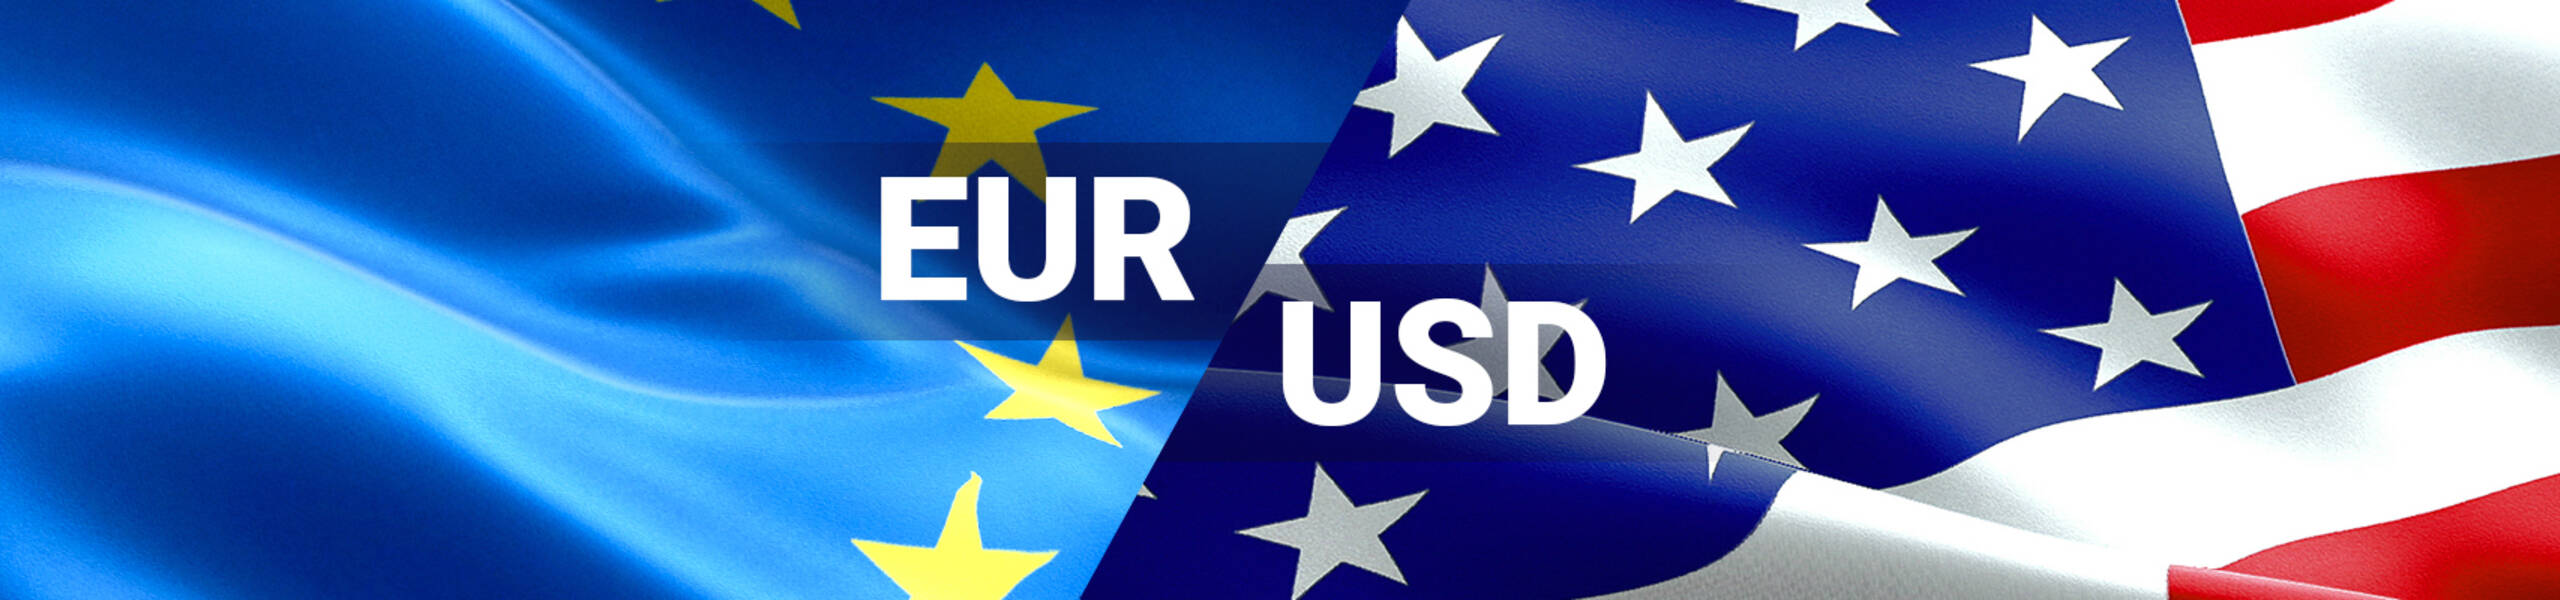 EUR/USD targeting levels above 1.19